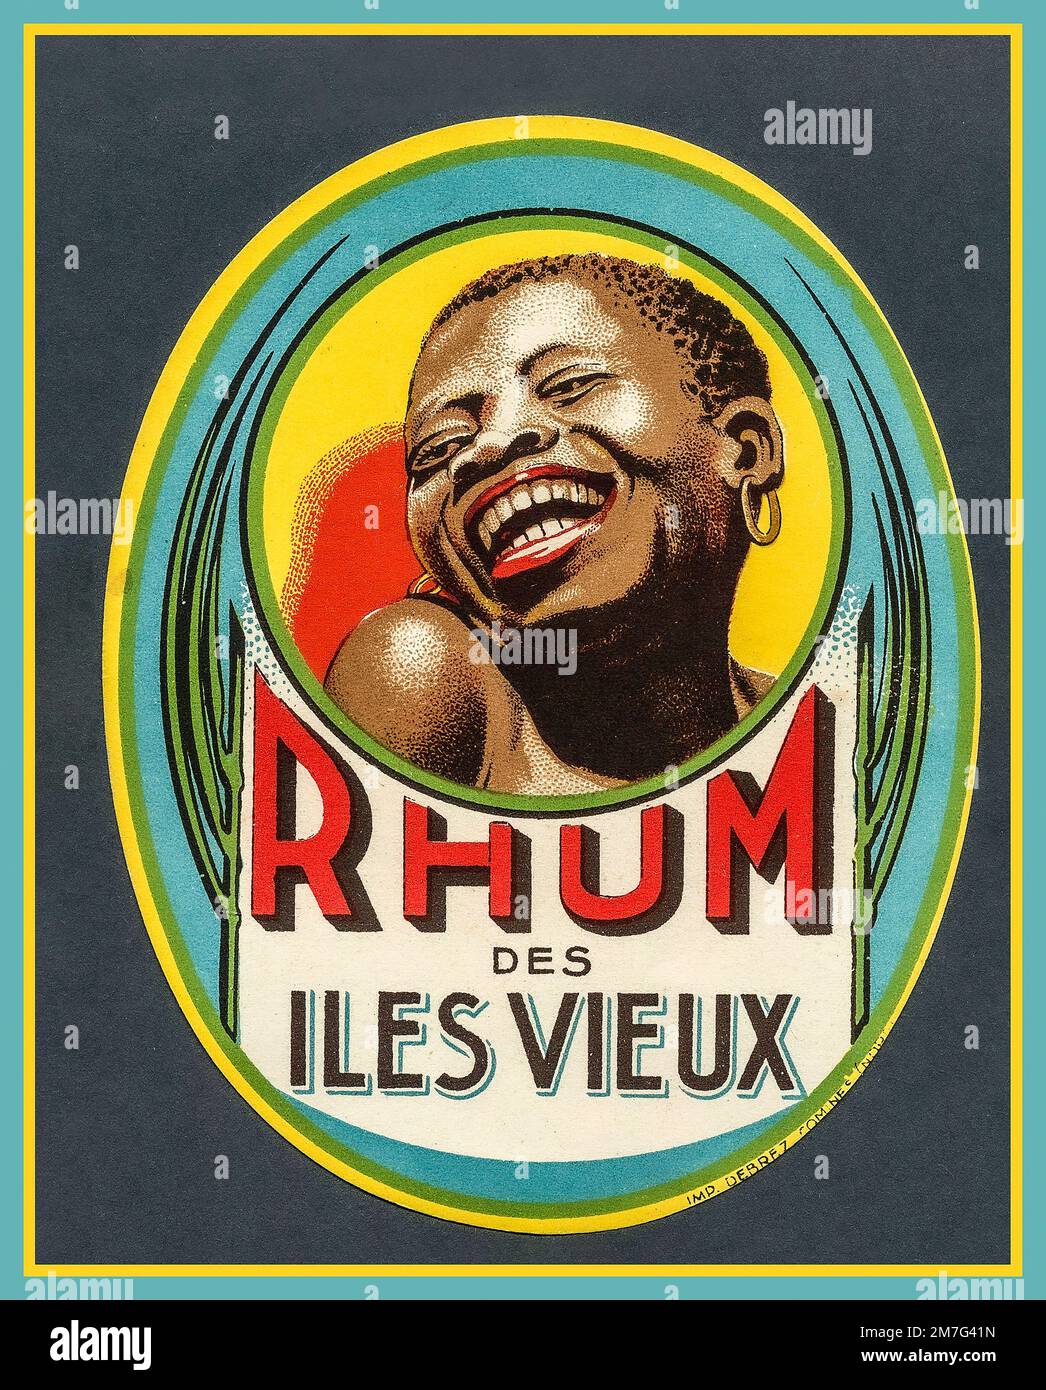 Vintage RHUM des Iles Vieux with laughing young Caribbean girl in centre 1930s advertising illustration Alcoholic spirit Rum traditionally distilled in the old Caribbean Islands Stock Photo